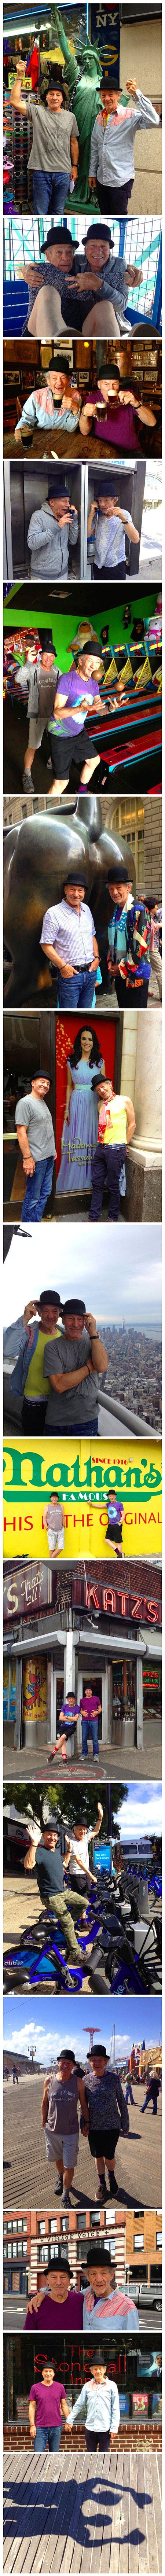 In honor of their final performances on Broadway in No Man's Land and Waiting for Godot, co-stars and best friends Sir Ian McKellen and Sir Patrick Stewart recently decided to say goodbye to New York City by releasing some funny outtakes from their adventures throughout New York.